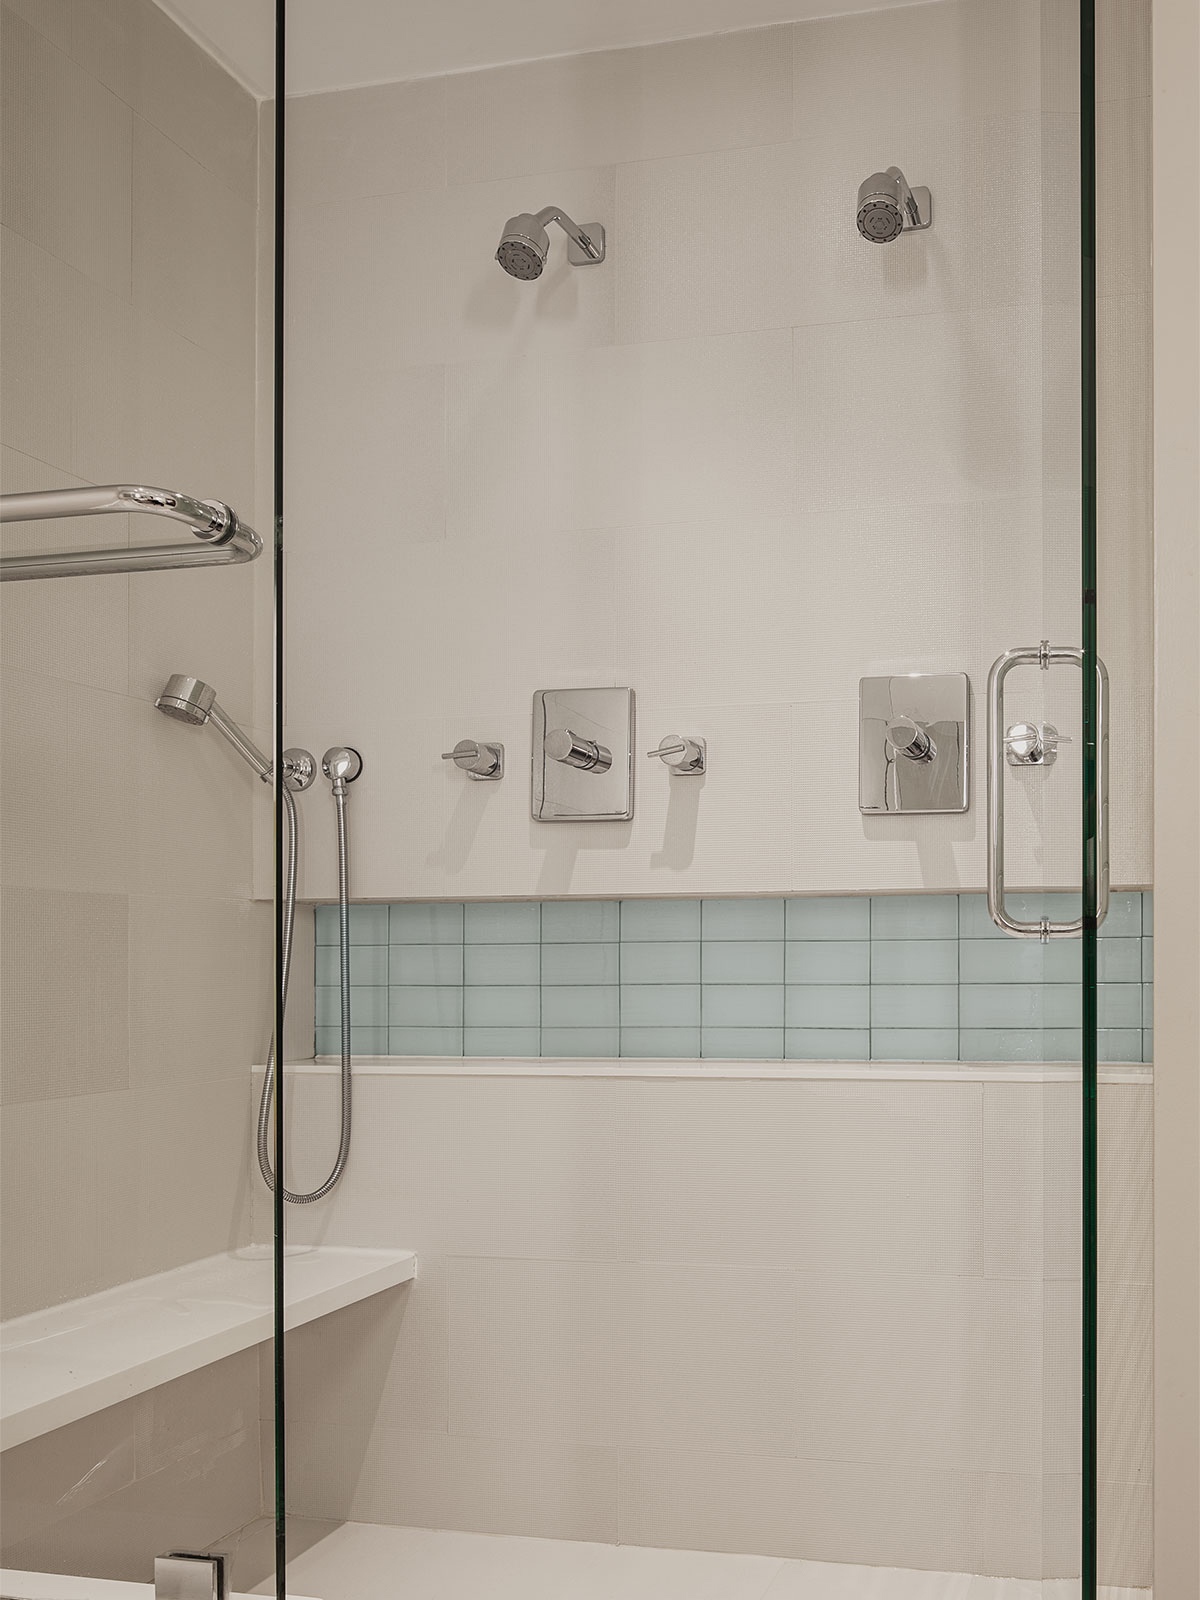 A textured white tile-clad double shower has a built-in bench on the left and a full-width niche for shower supplies with an accent of clear glass tile.